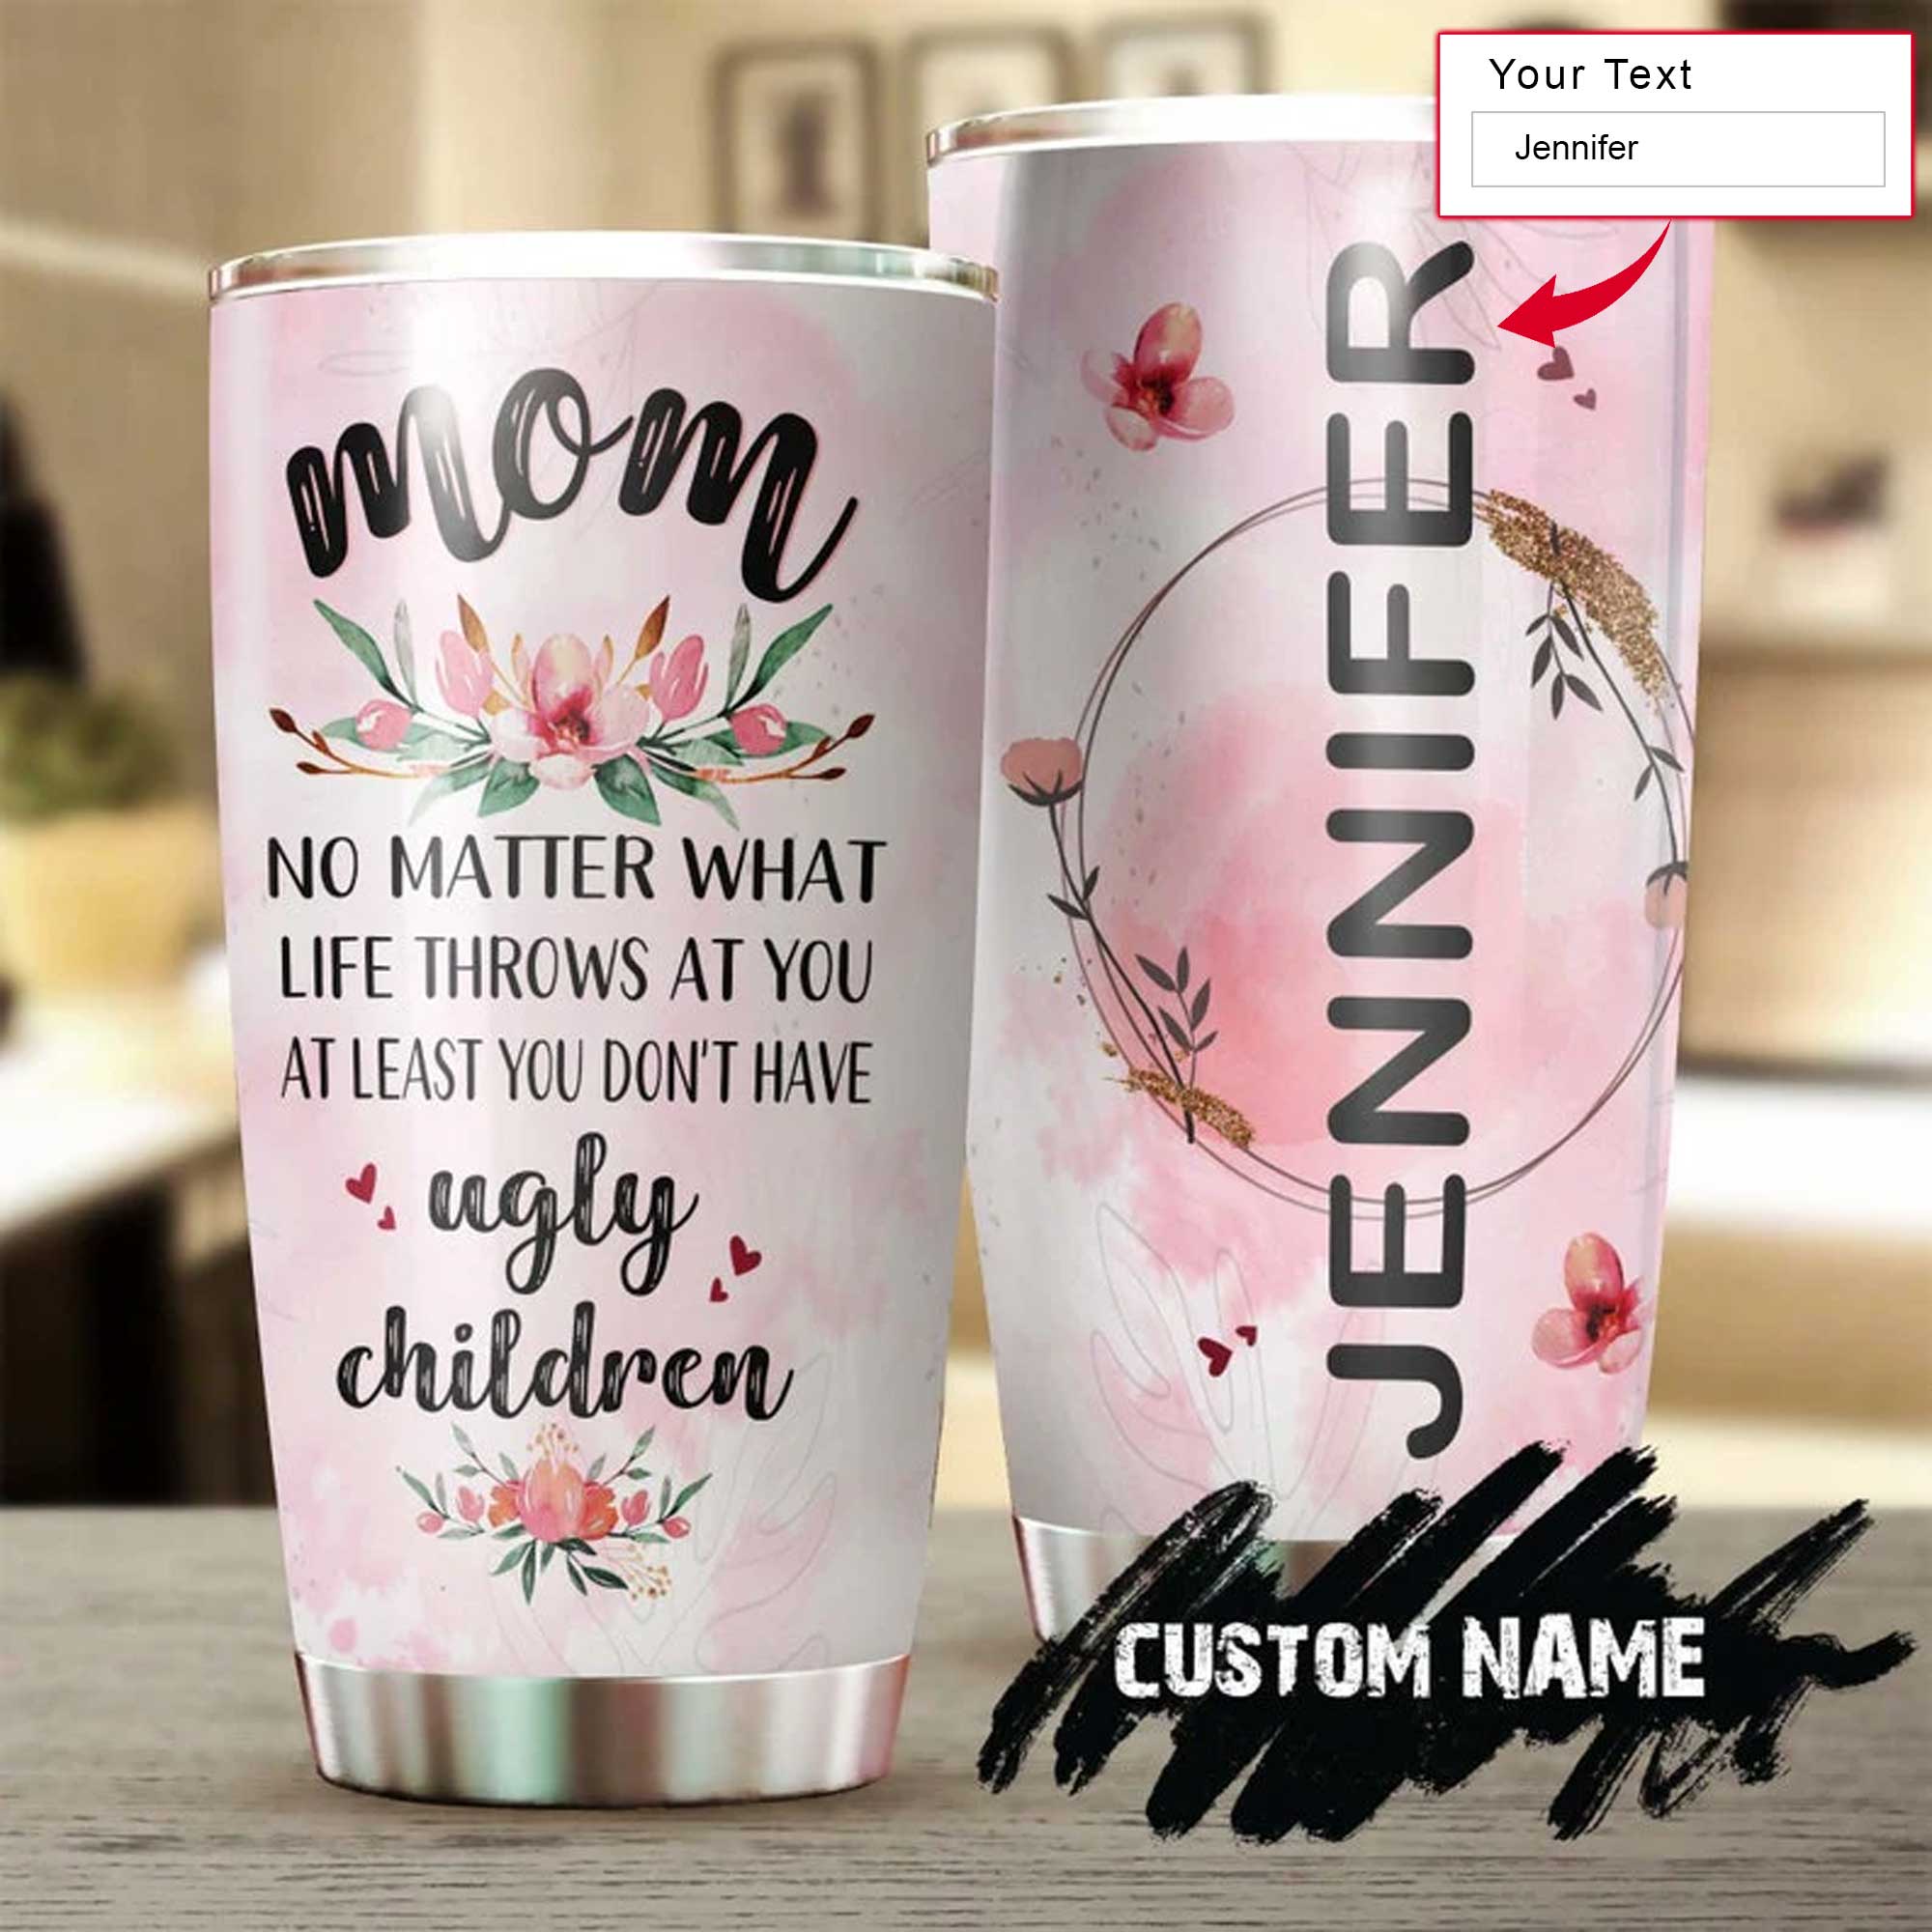 Personalized Mother's Day Gift Tumbler - Custom Gift For Mother's Day, Presents For Mom - No Matter What Life Throws At You Funny Floral Tumbler